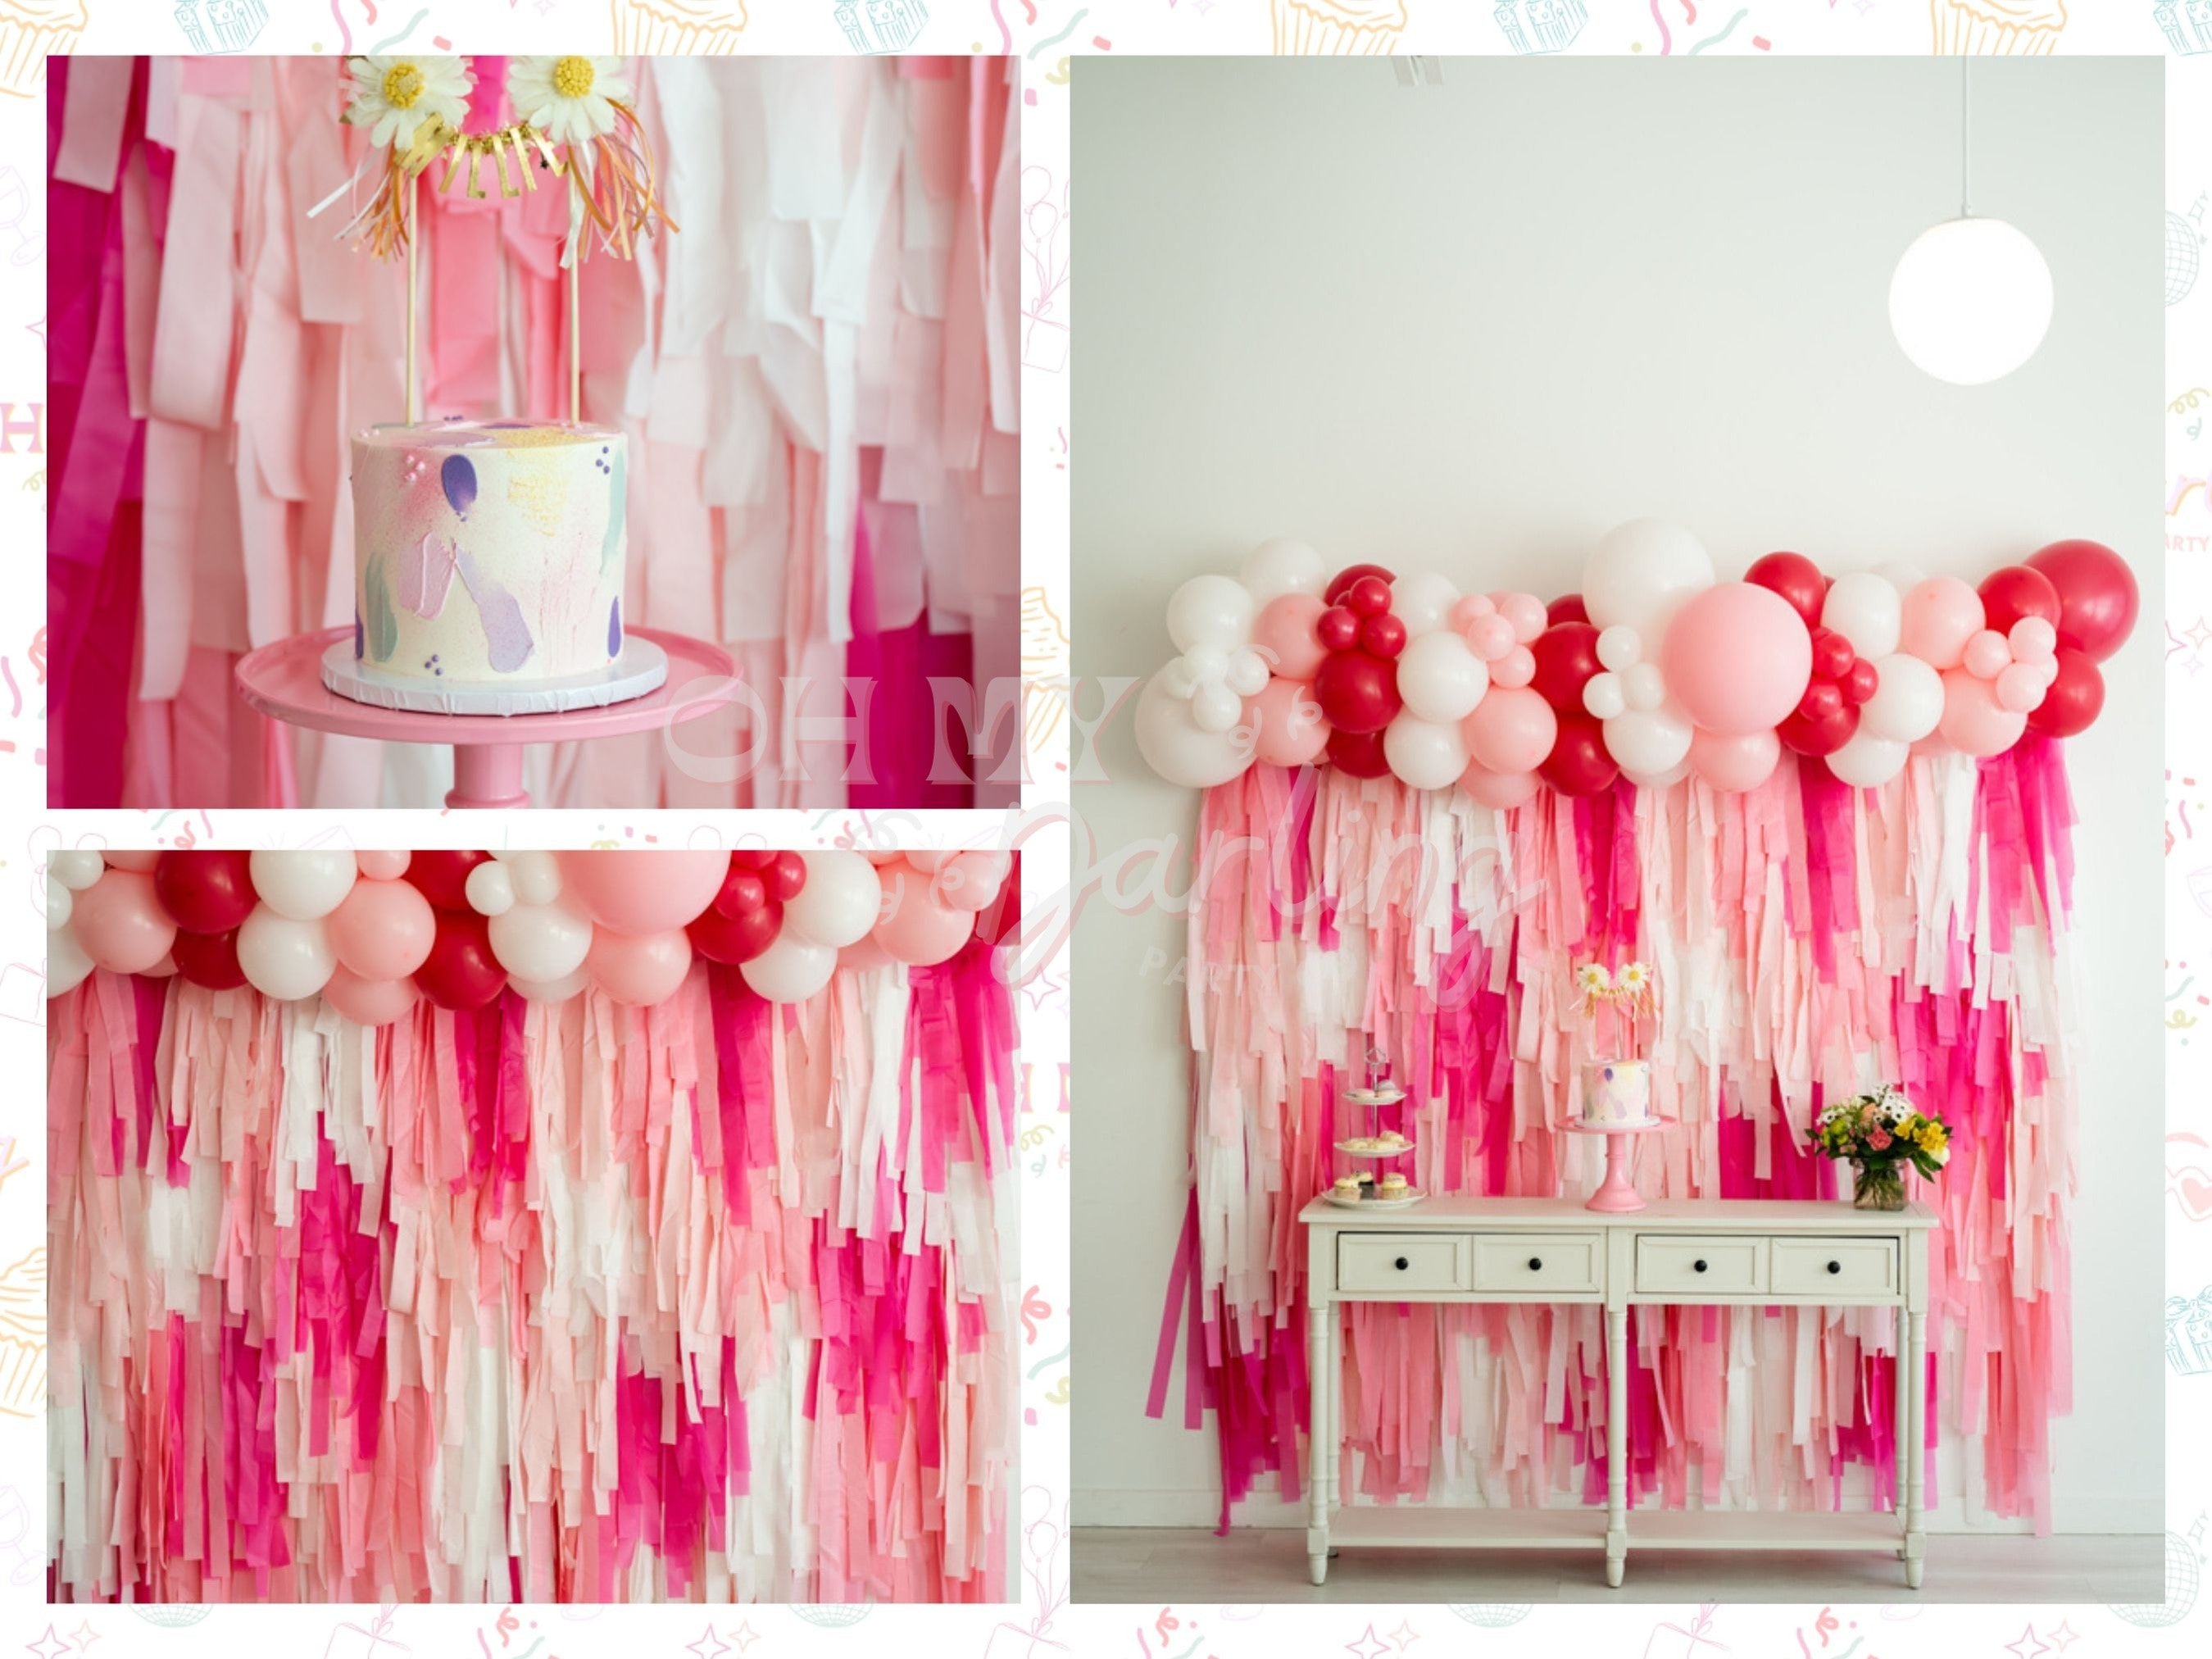 Pretty In Pink Backdrop-Fringe Backdrop-Party Decor-Oh My Darling Party Co-Oh My Darling Party Co-baby pink, baby shower, bachelorette, backdrops for party, balloon garlands, barbie, be my valentine, best sellers, blush, bridal shower, bubblegum, candy pink, dance, default, florals, fringe garland, Fringe Streamers, girl party, graduation, OMDPC, party backdrops, Pink, pink and white, pink baby shower, pink bachelorette, PINK BACKDROP, pink halloween, pink party, pink shower decor, pink unicorn, princess, s